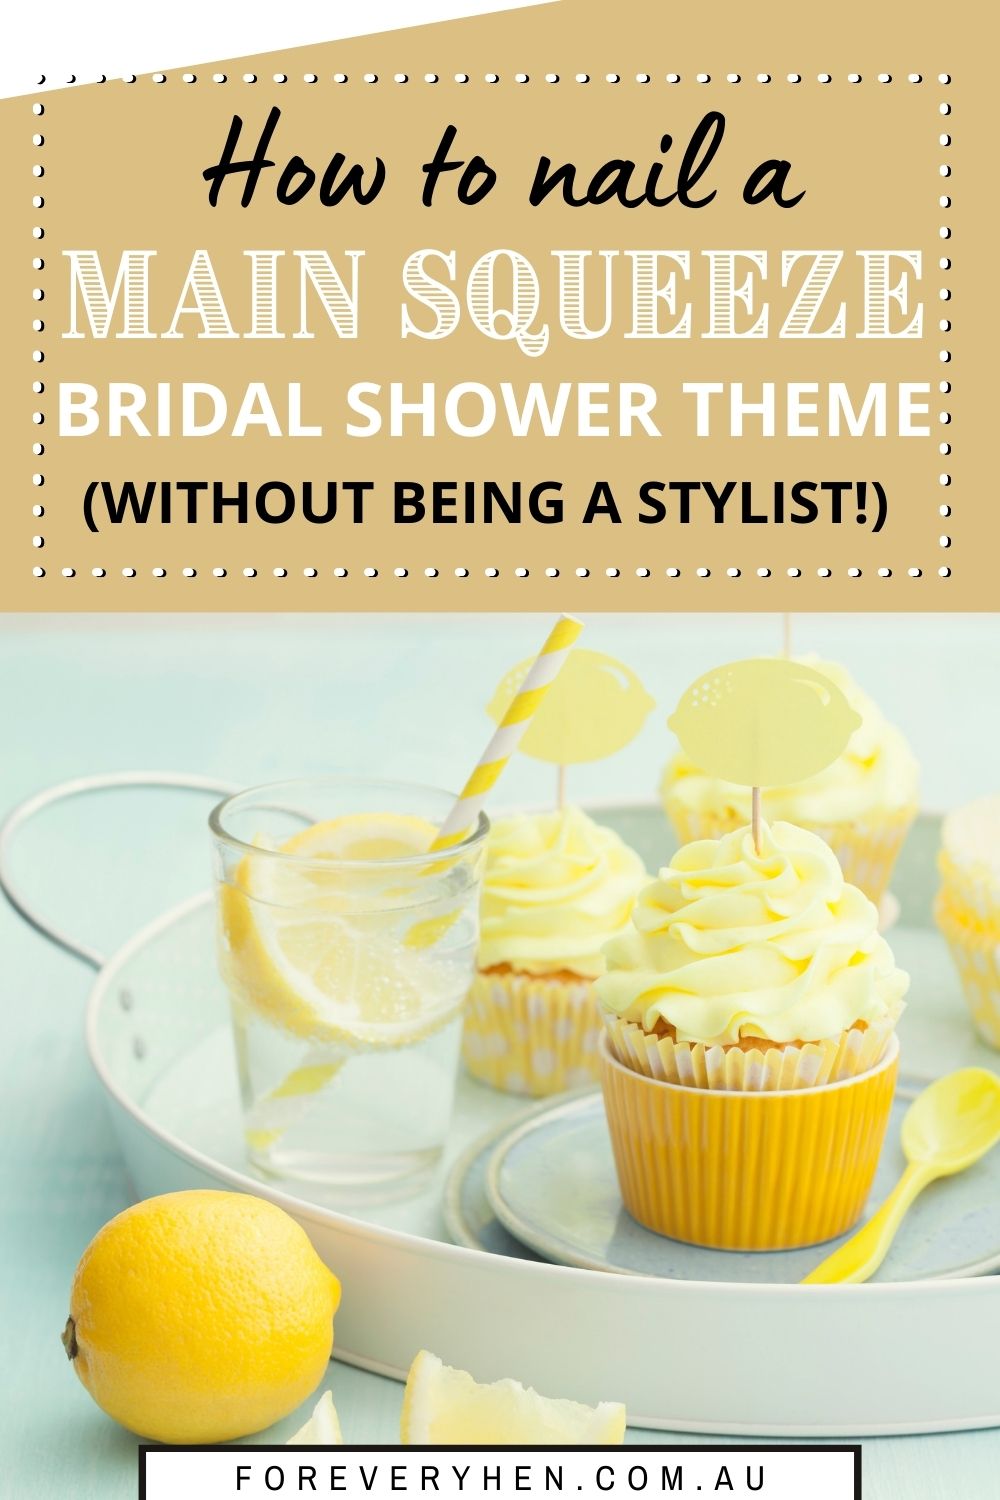 Main Squeeze Bridal Shower Theme